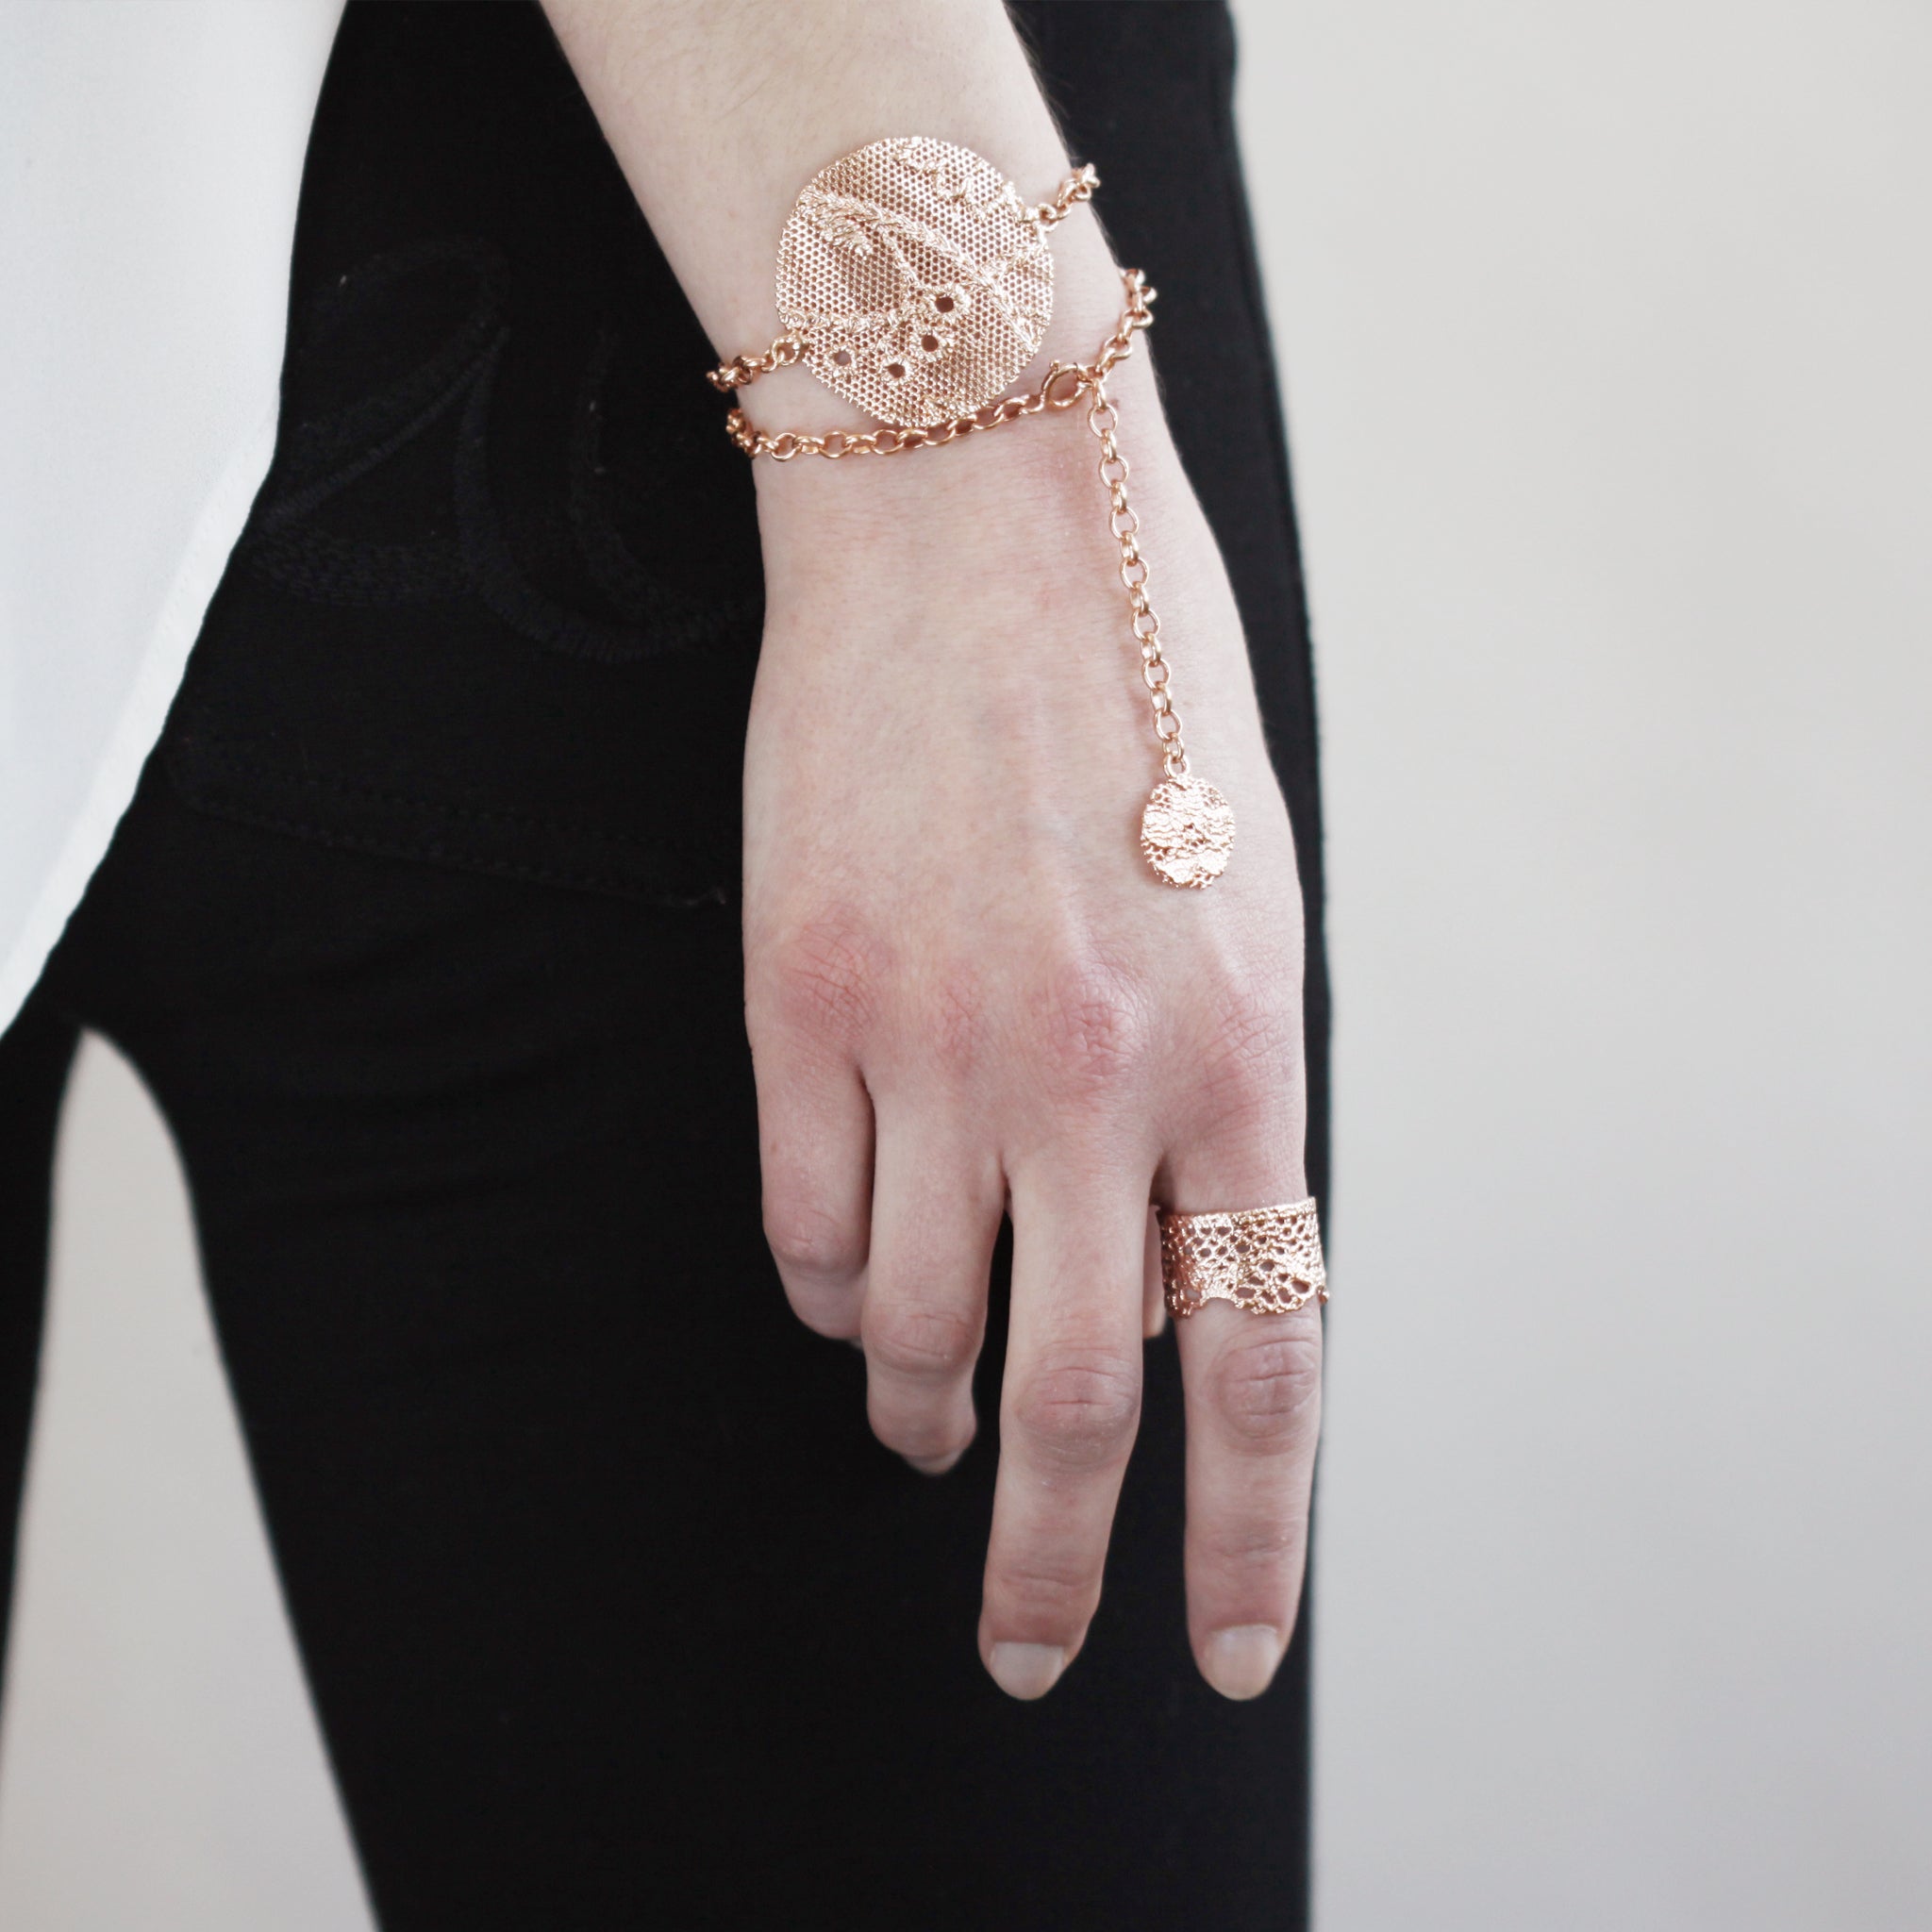 Rose Wrapped Chain Bracelet